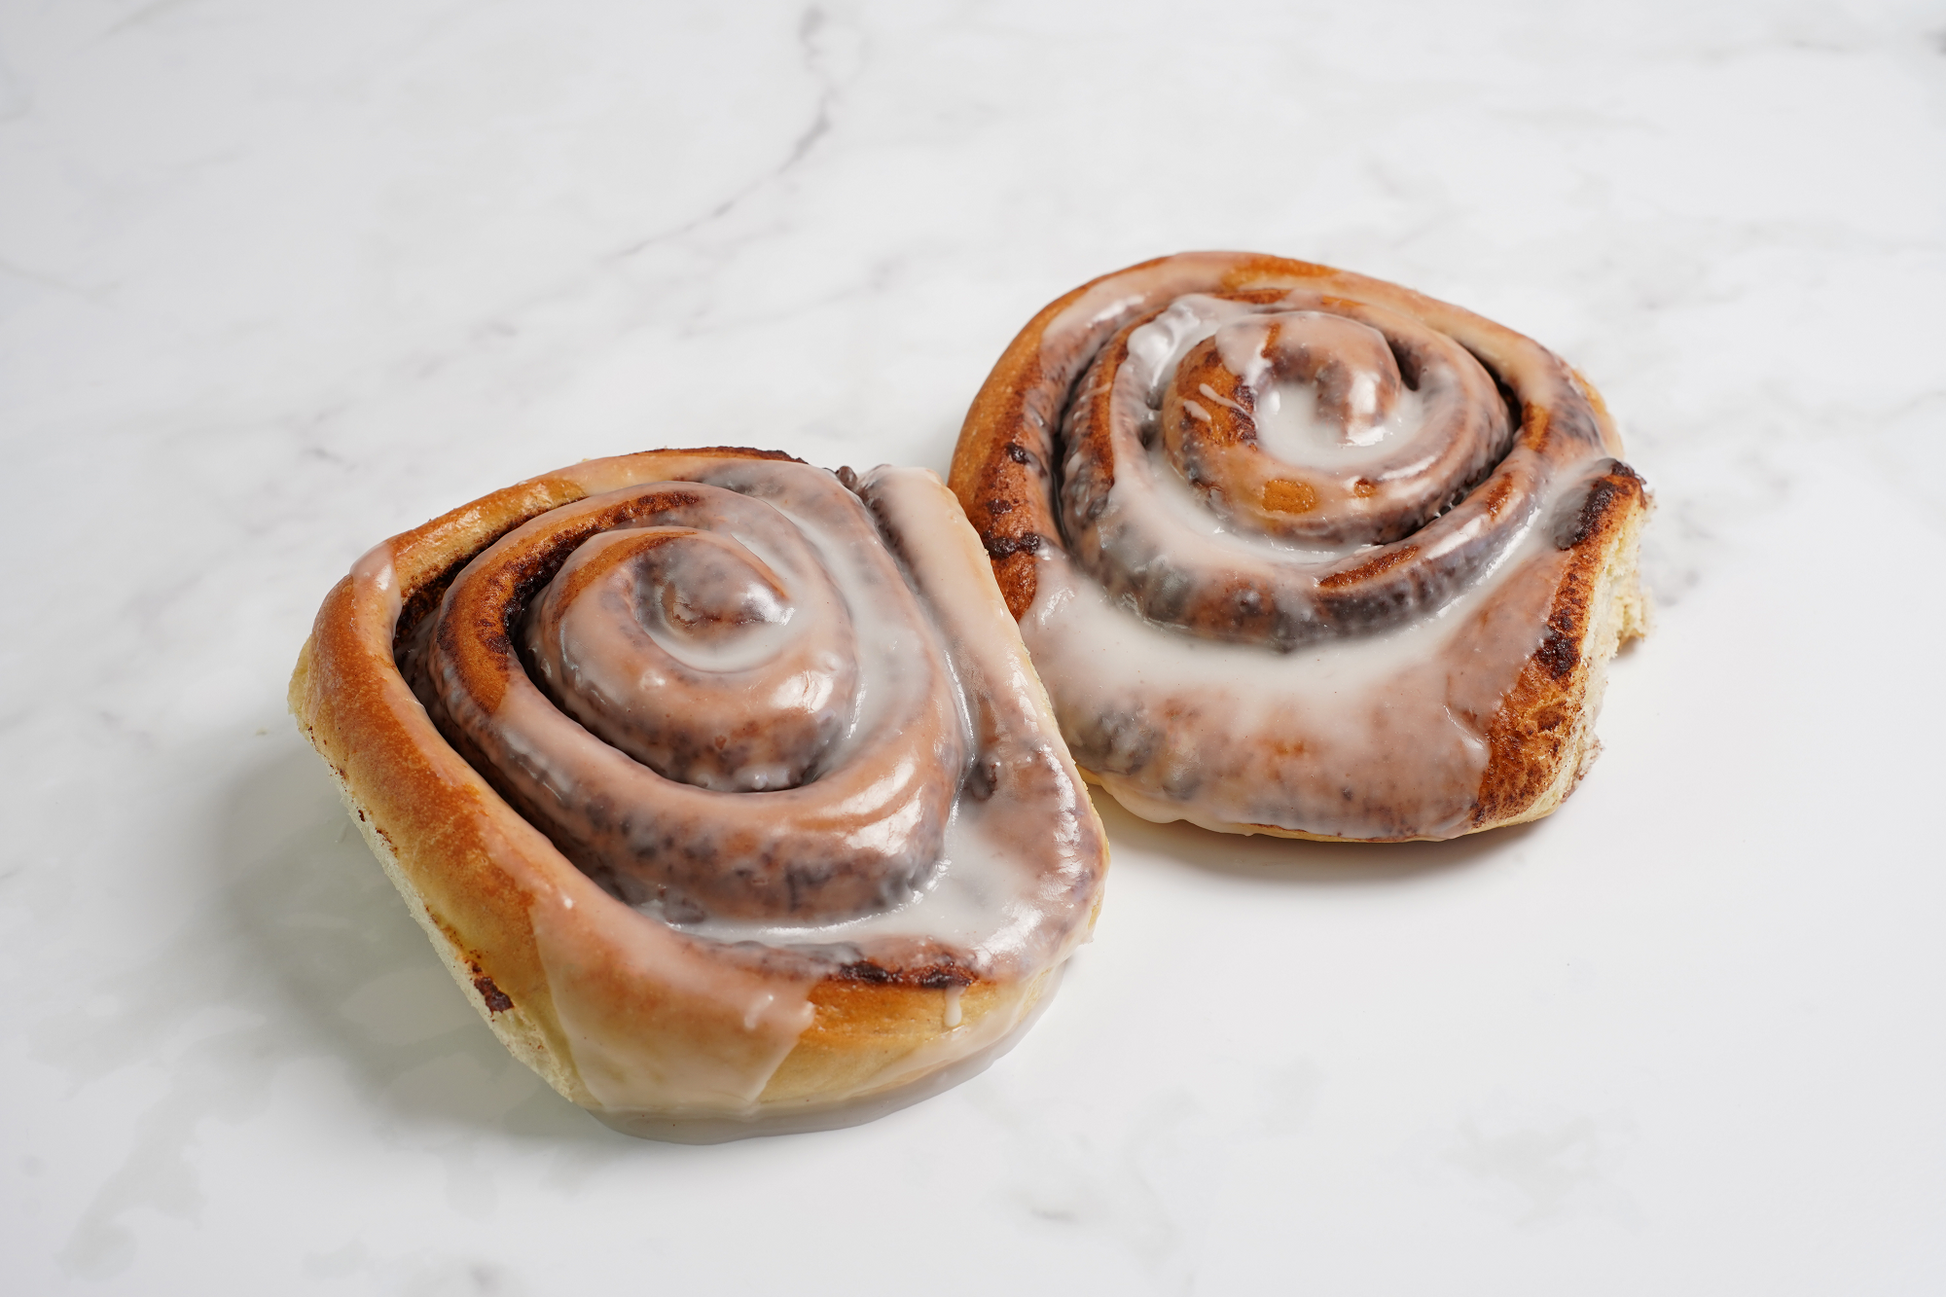 Two giant cinnamon rolls covered in icing sitting on a marble background.